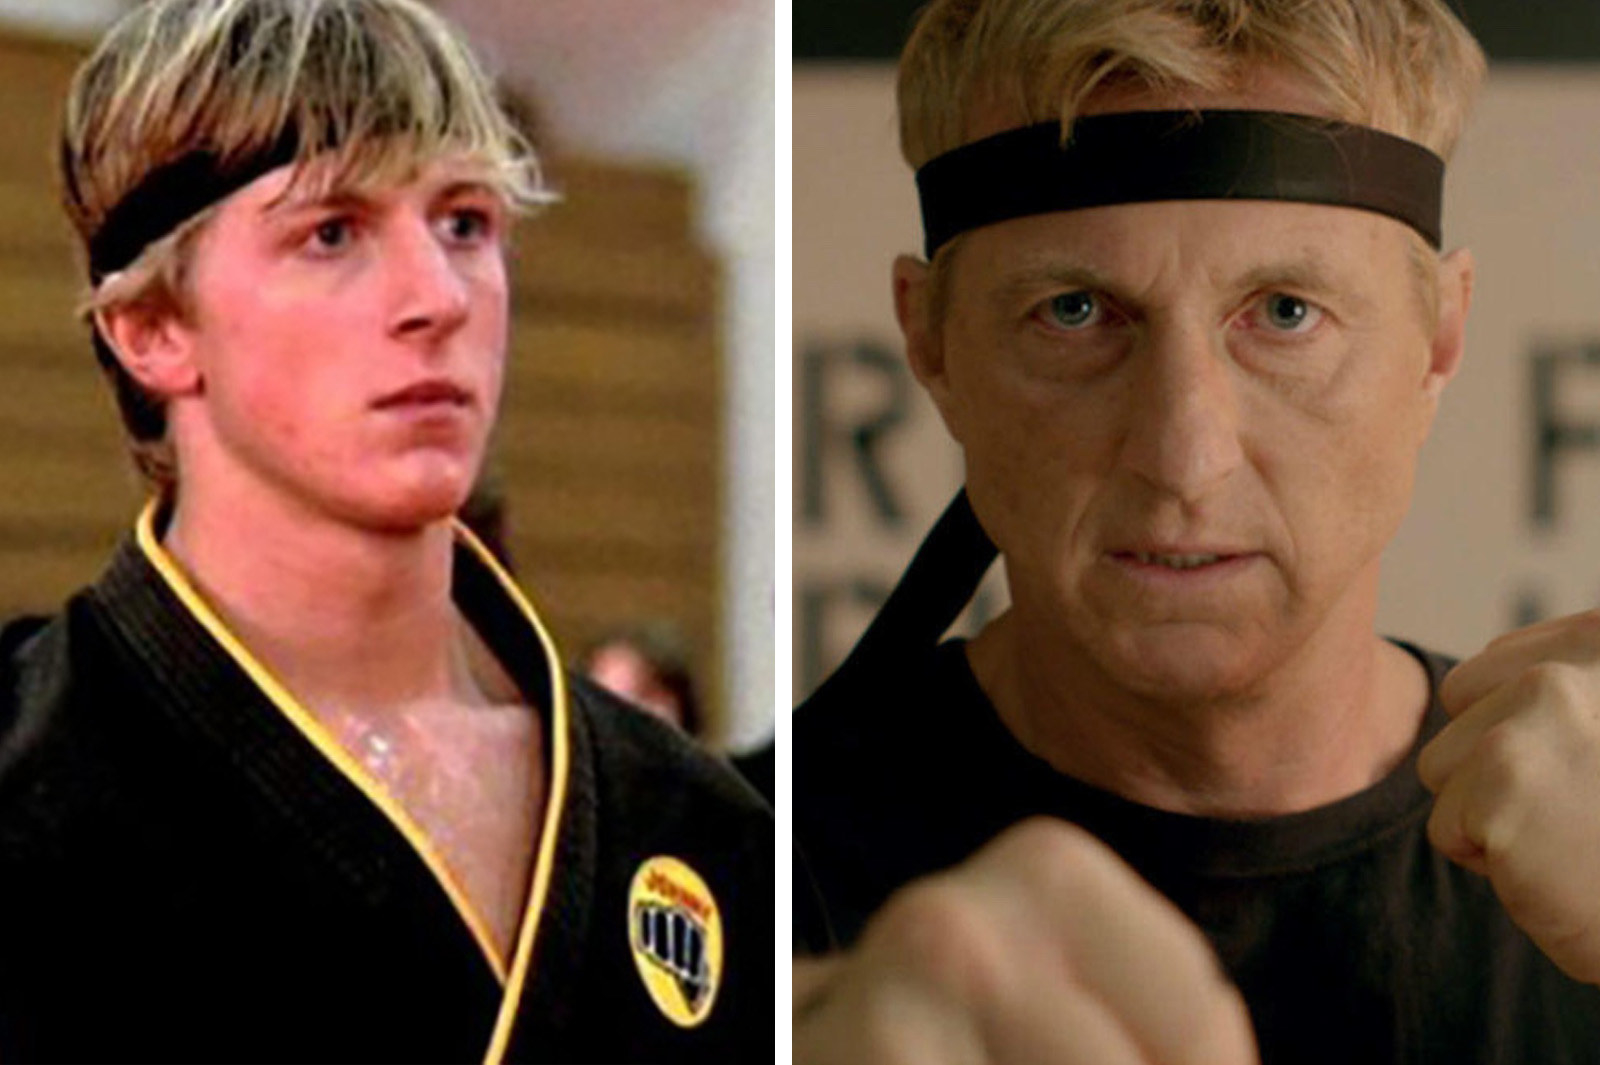 Cobra Kai is a funny and engaging return to The Karate Kid universe